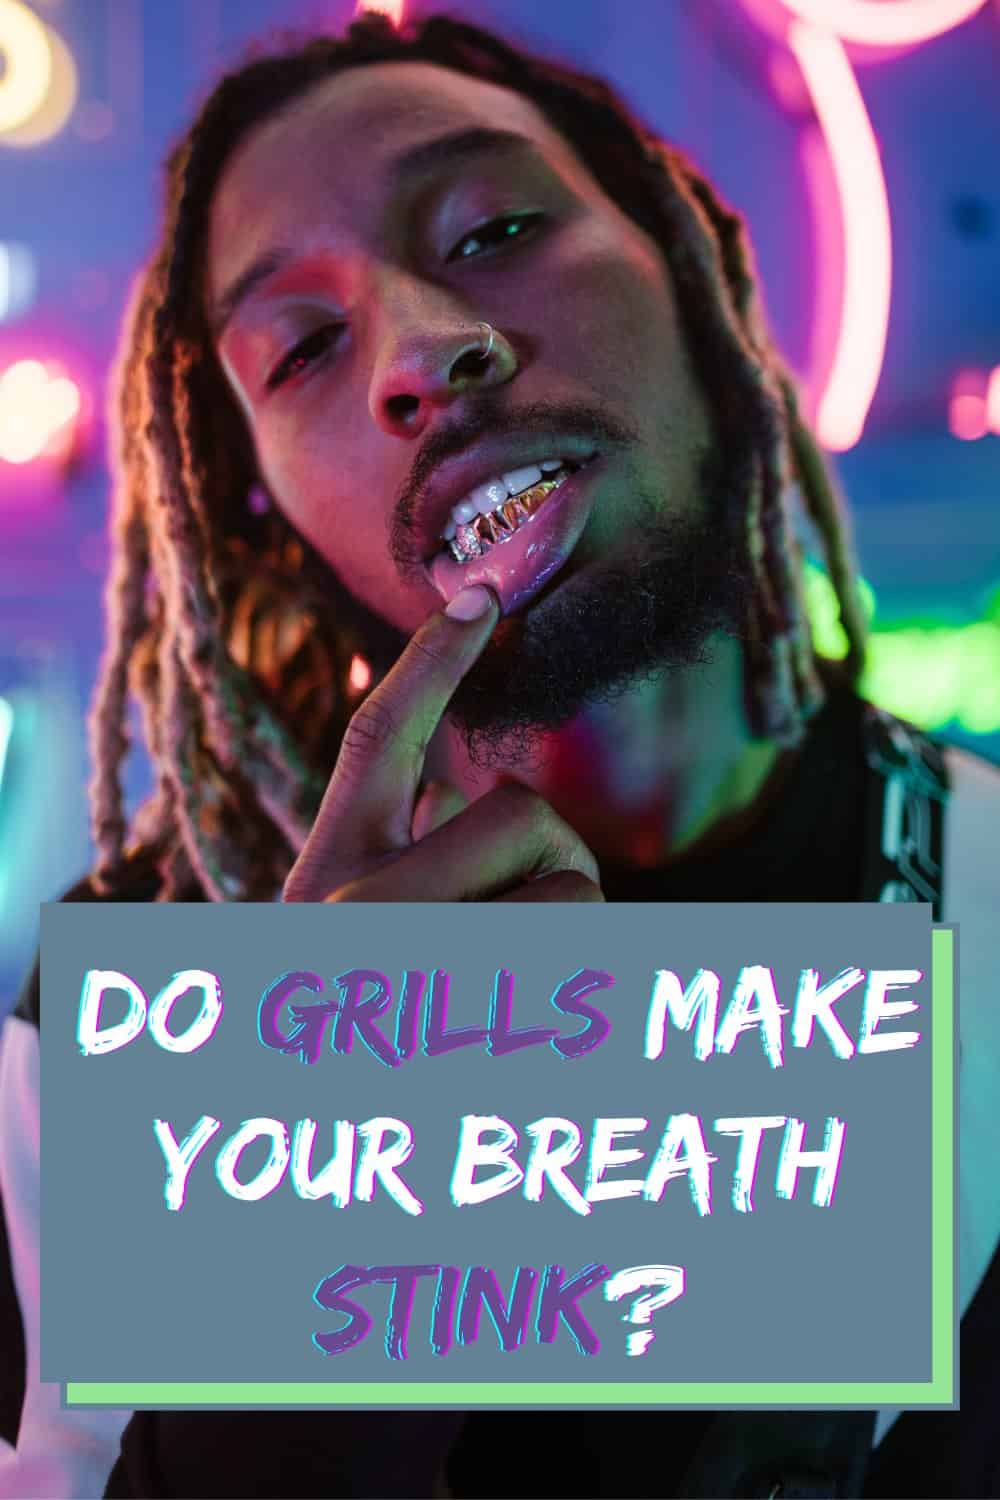 Why grills give you bad breath?